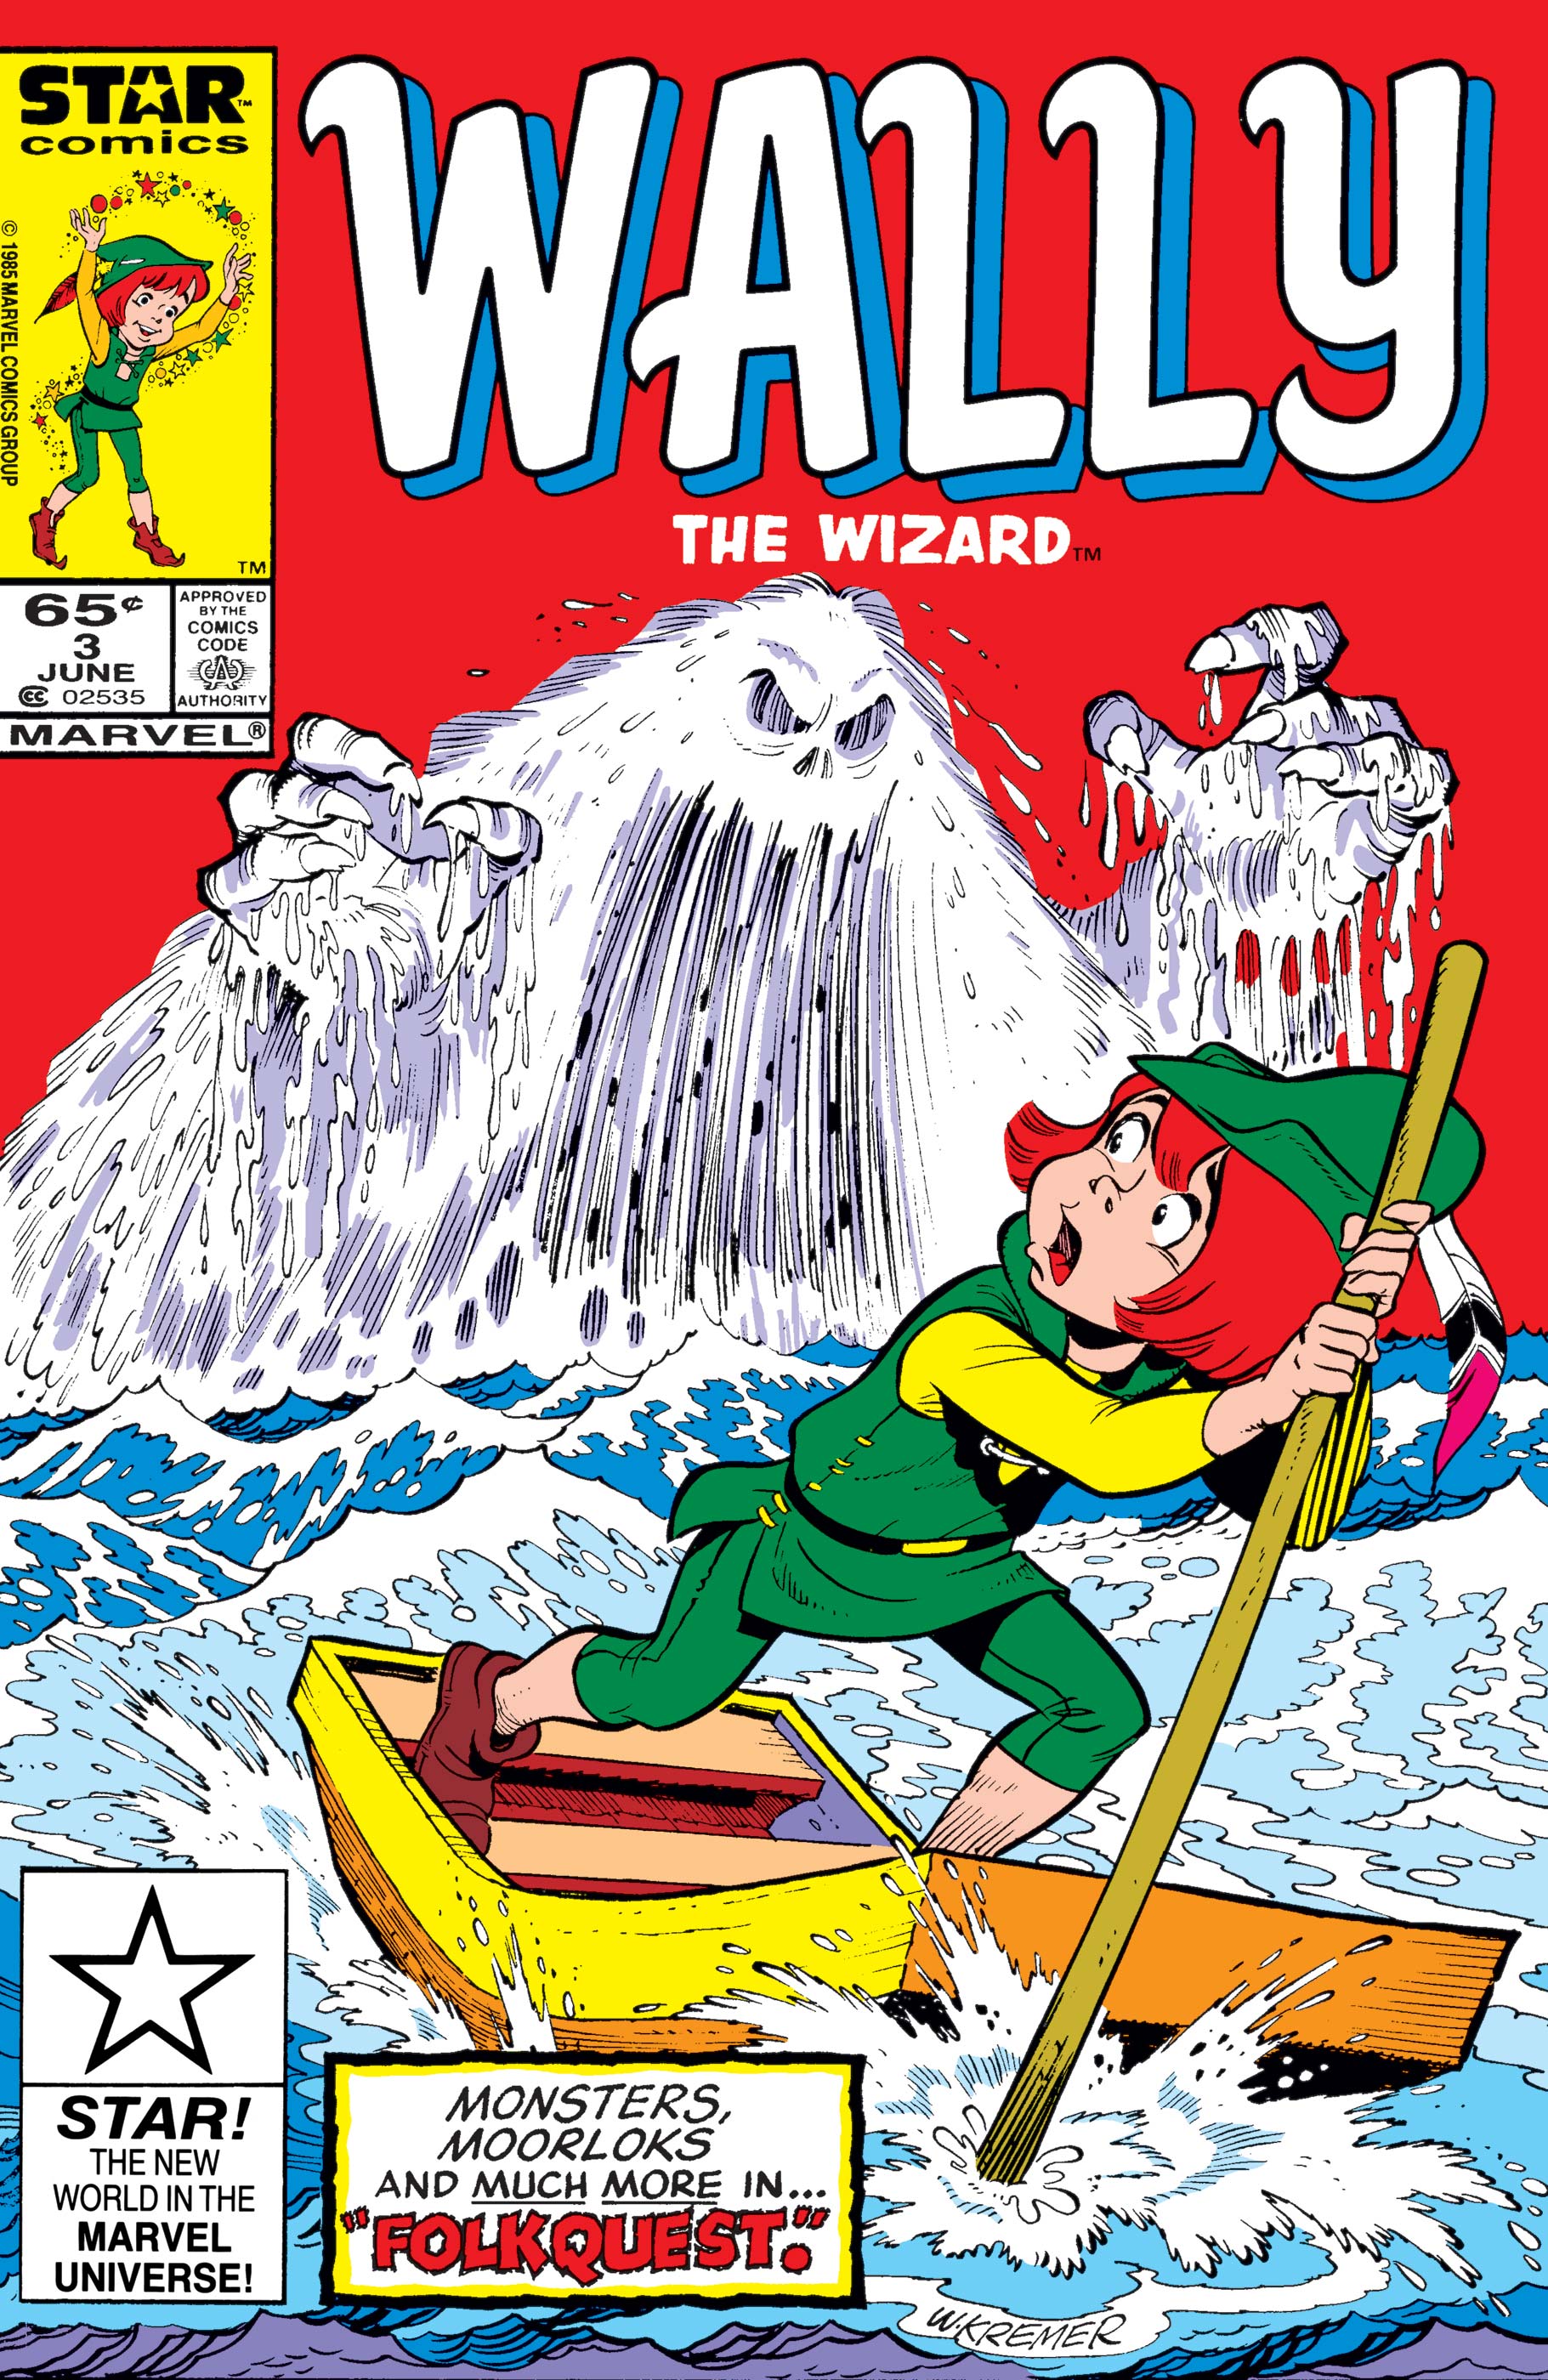 Wally the Wizard (1985) #3